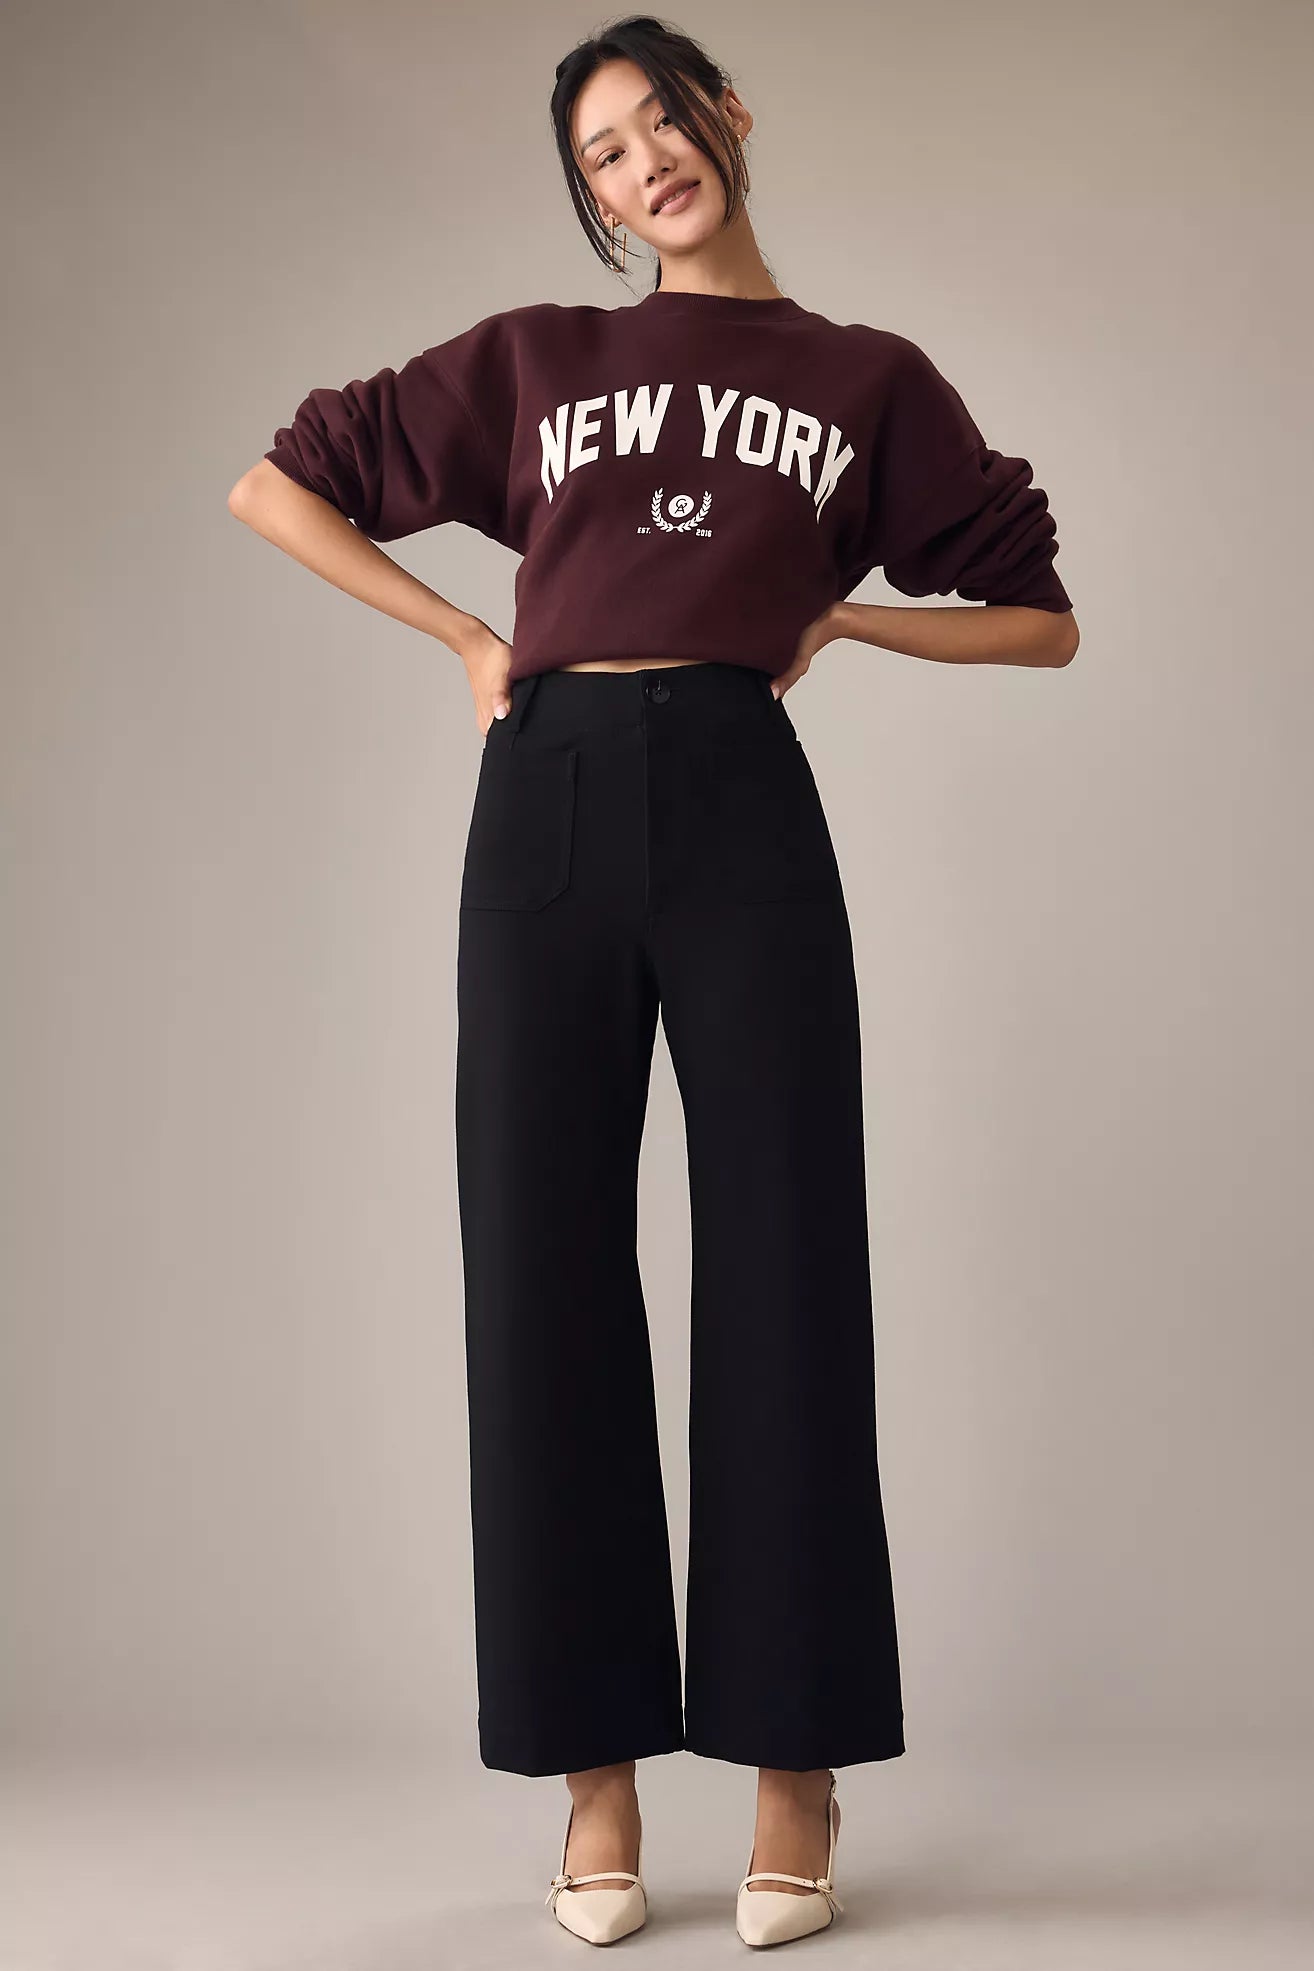 I'm 5'2 heres the 21 Best Stores To Buy High Waisted Pants For Petites –  topsfordays